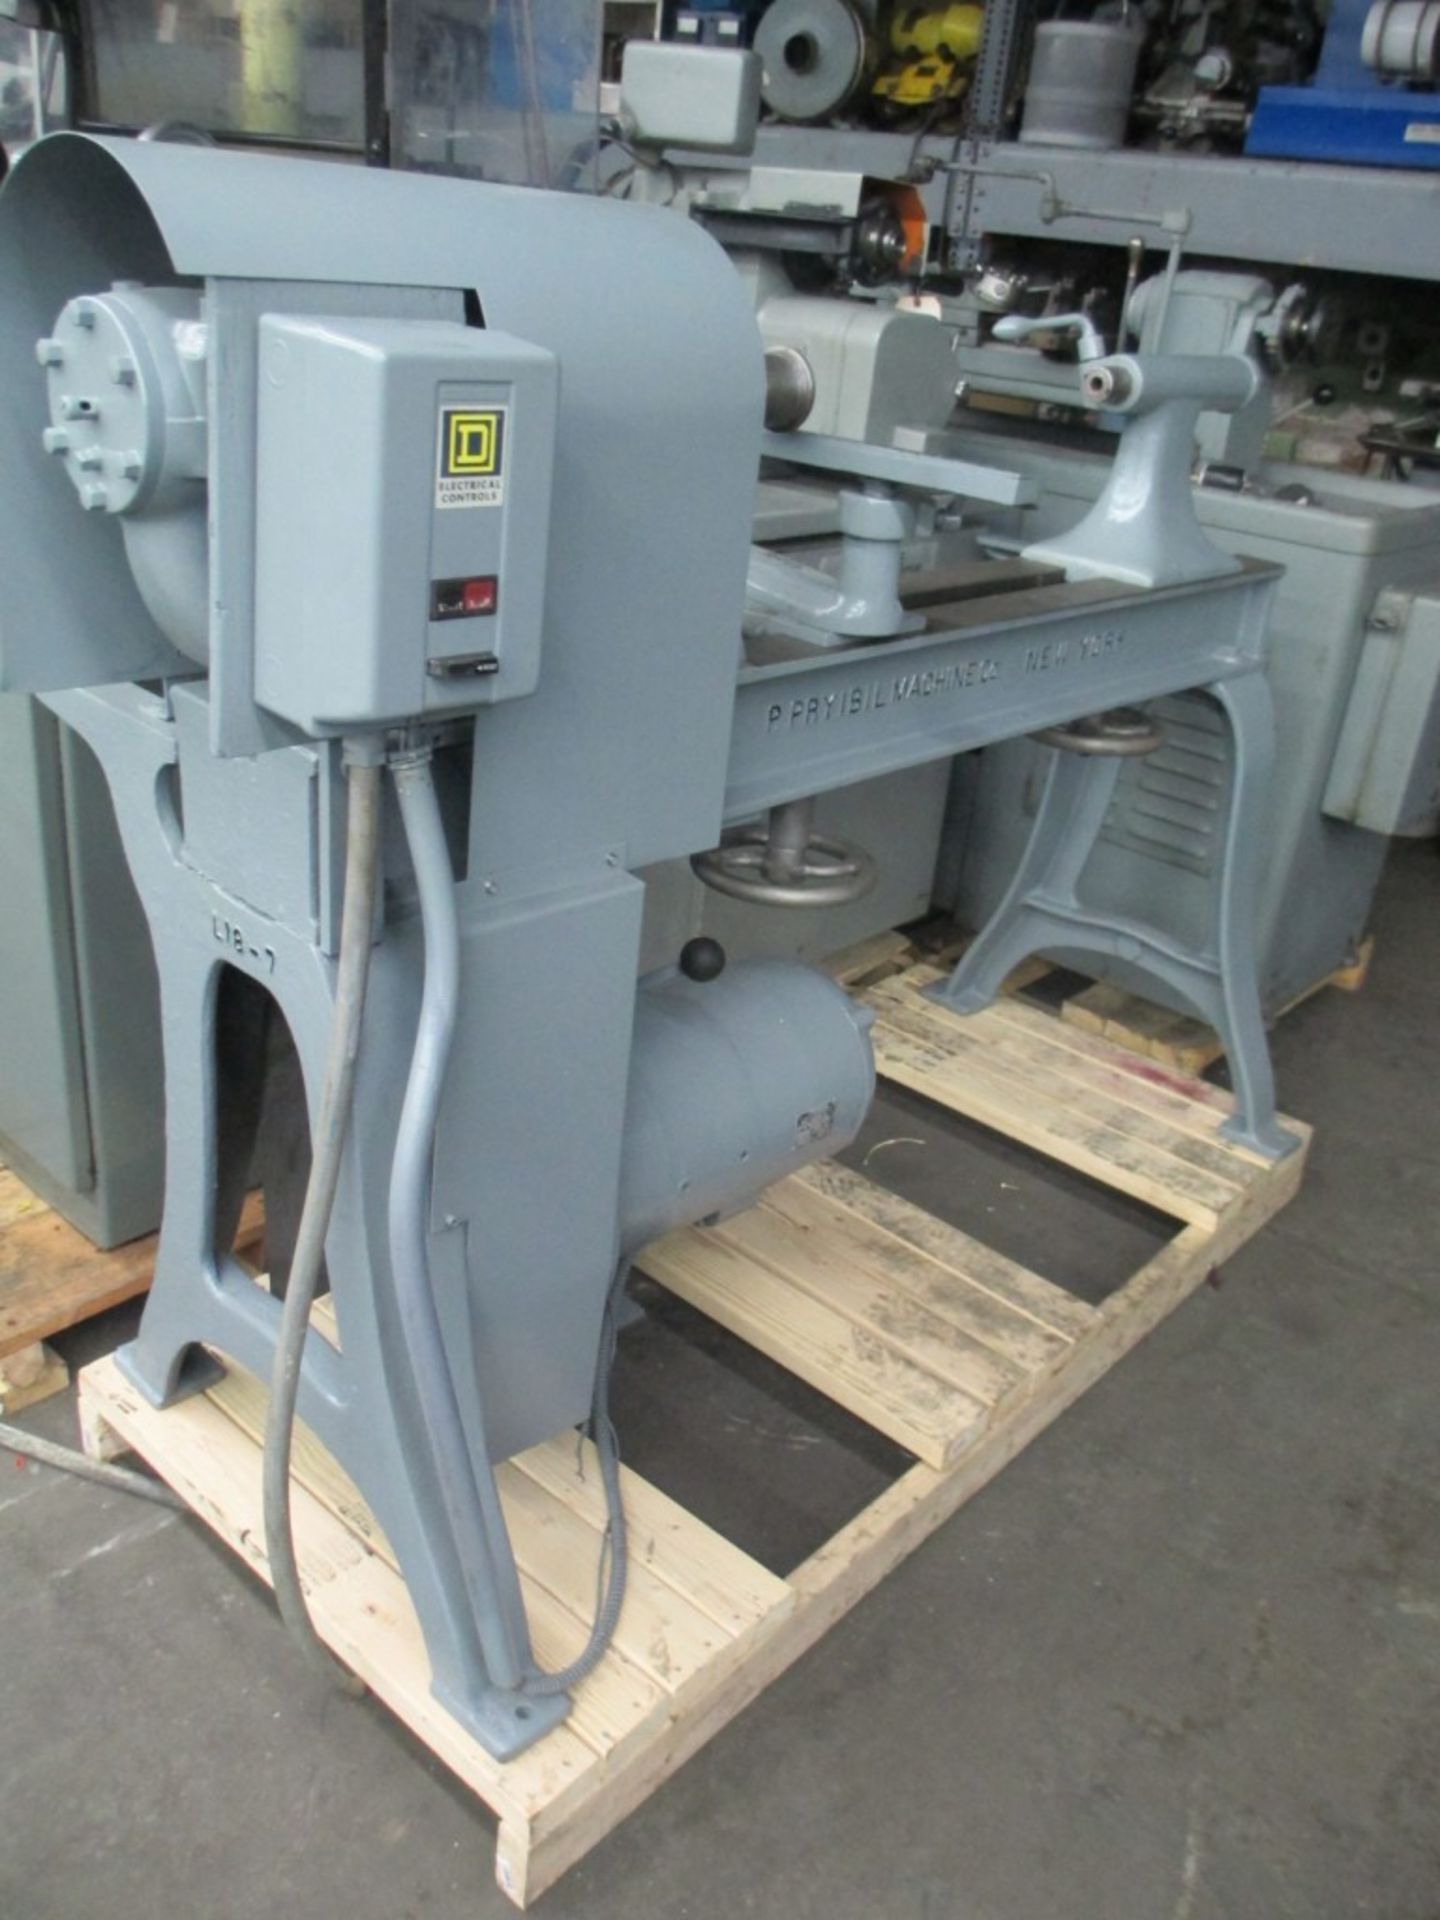 P. PRYIBIL MACHINE CO. MDL. L18-2 SPINNING LATHE, 220-440V / 3PH / 60 CYCLE, 18" SWING, 26" CENTER - Image 3 of 6